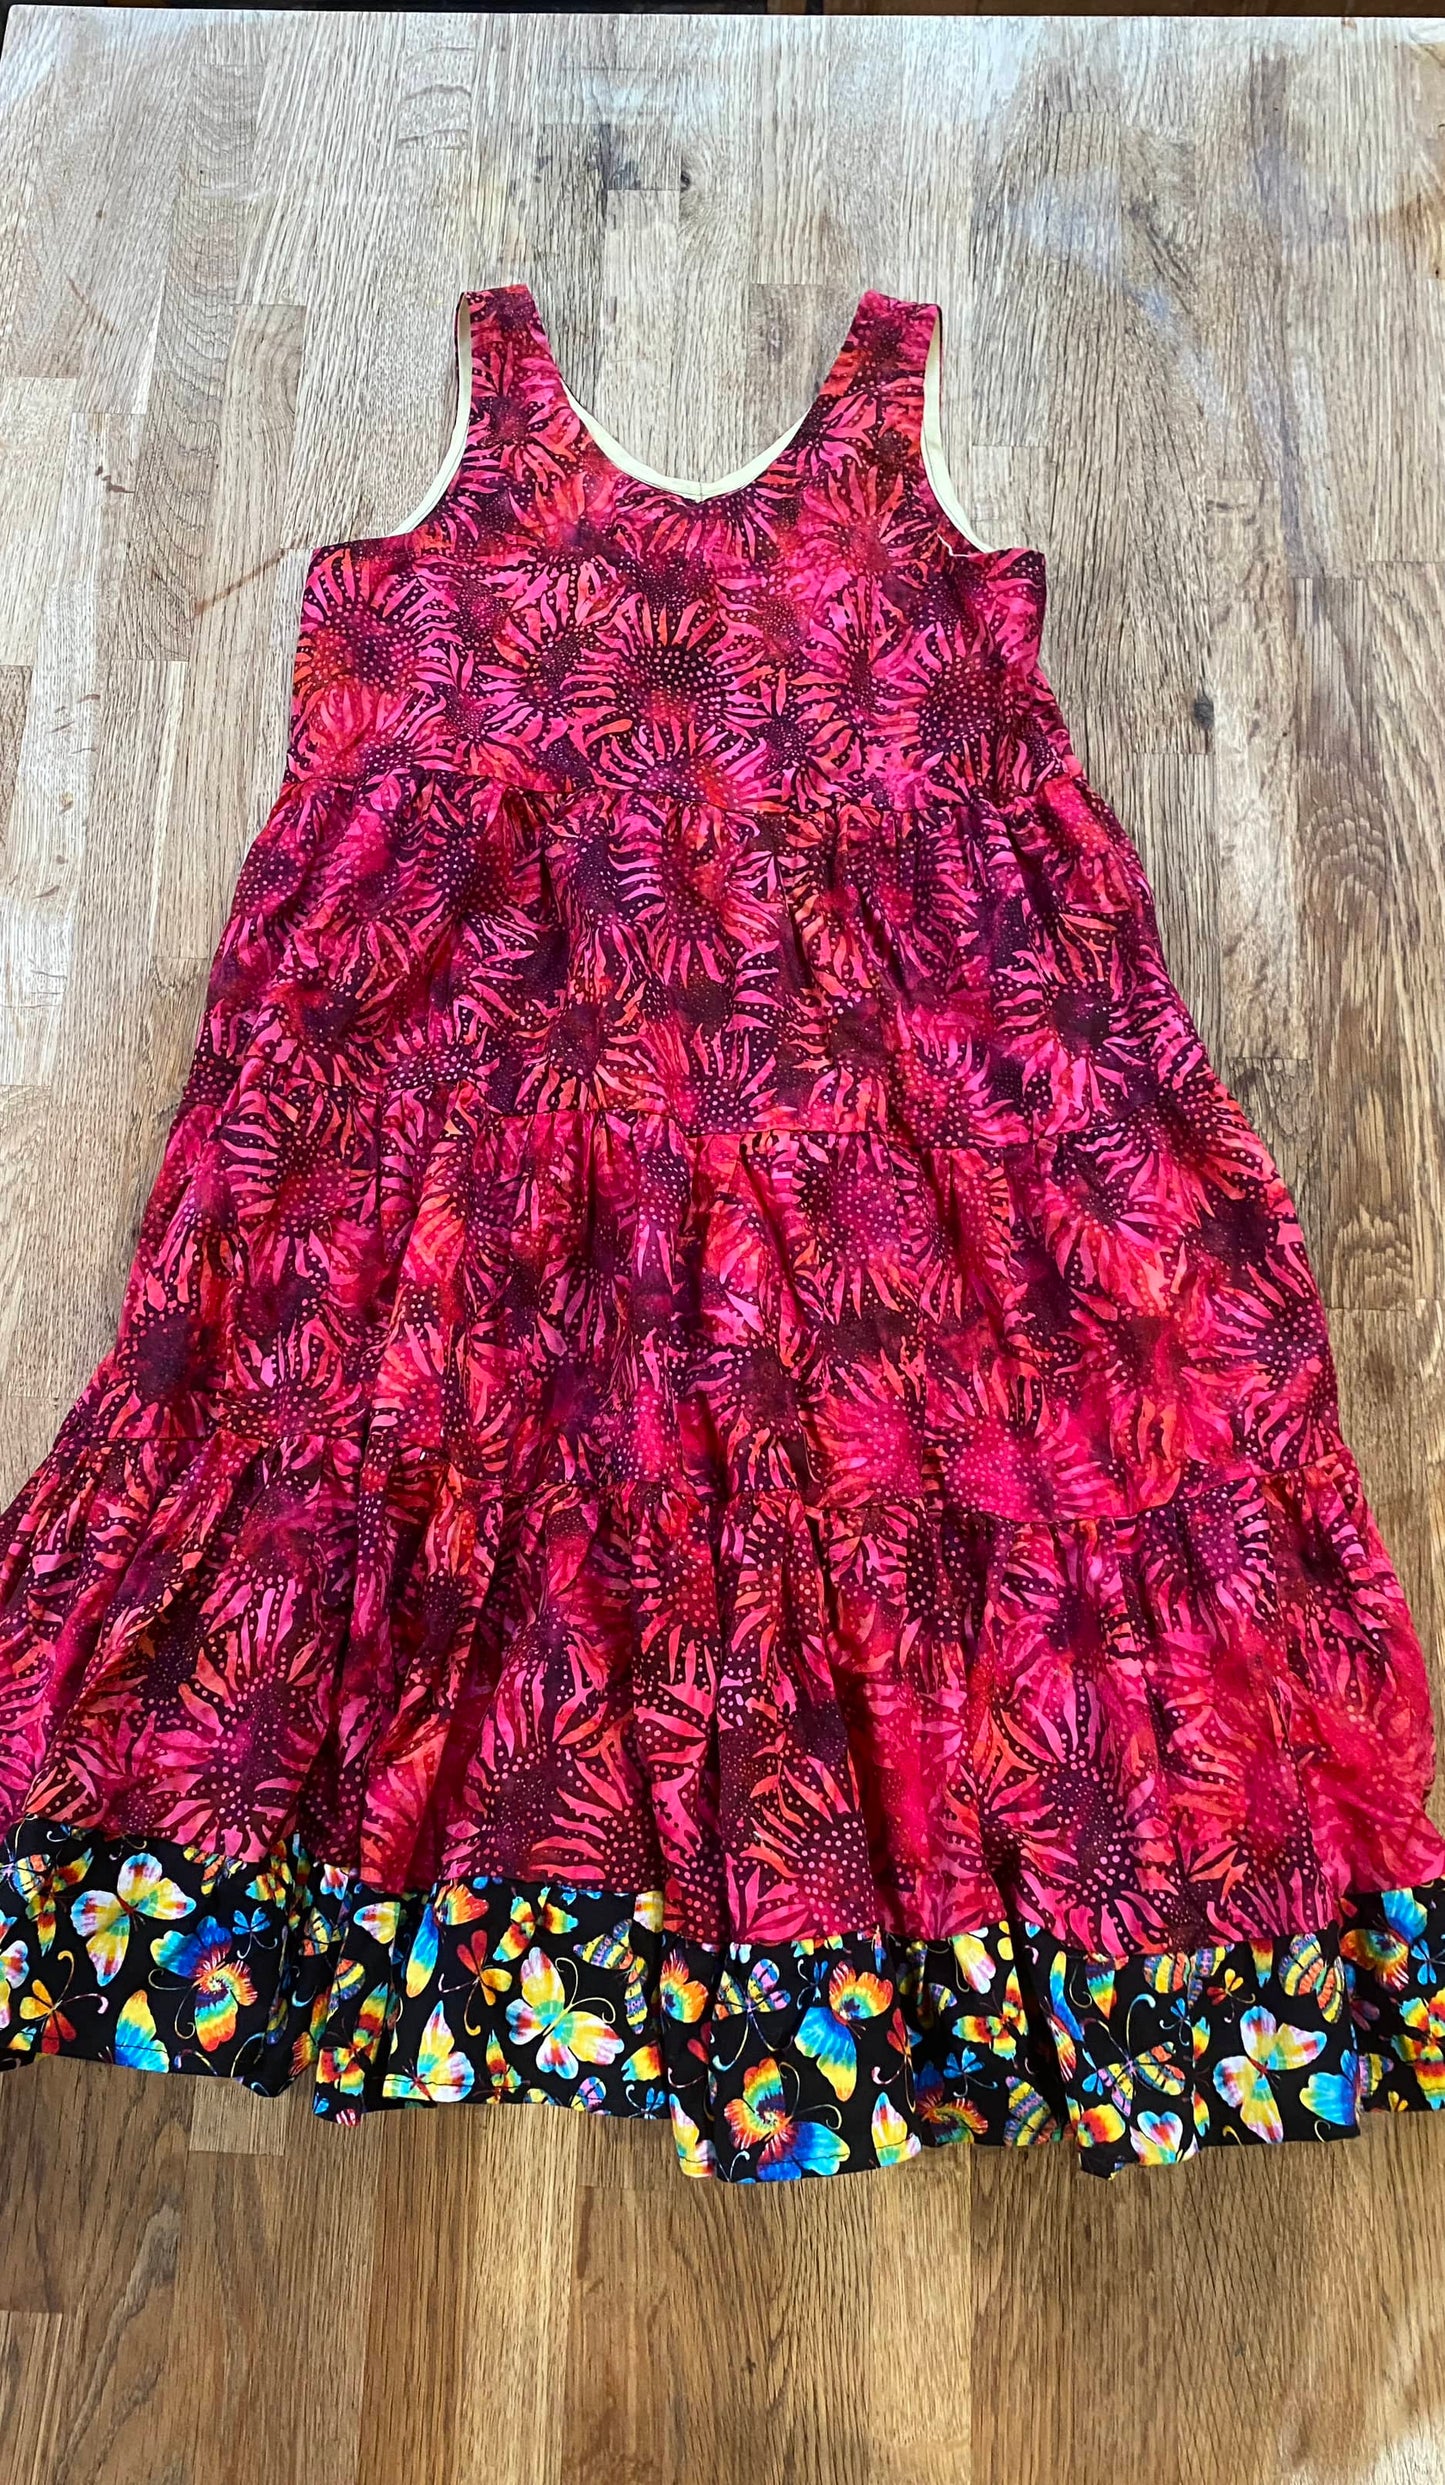 Sunflowers Dress (Pre-Loved) Size 14